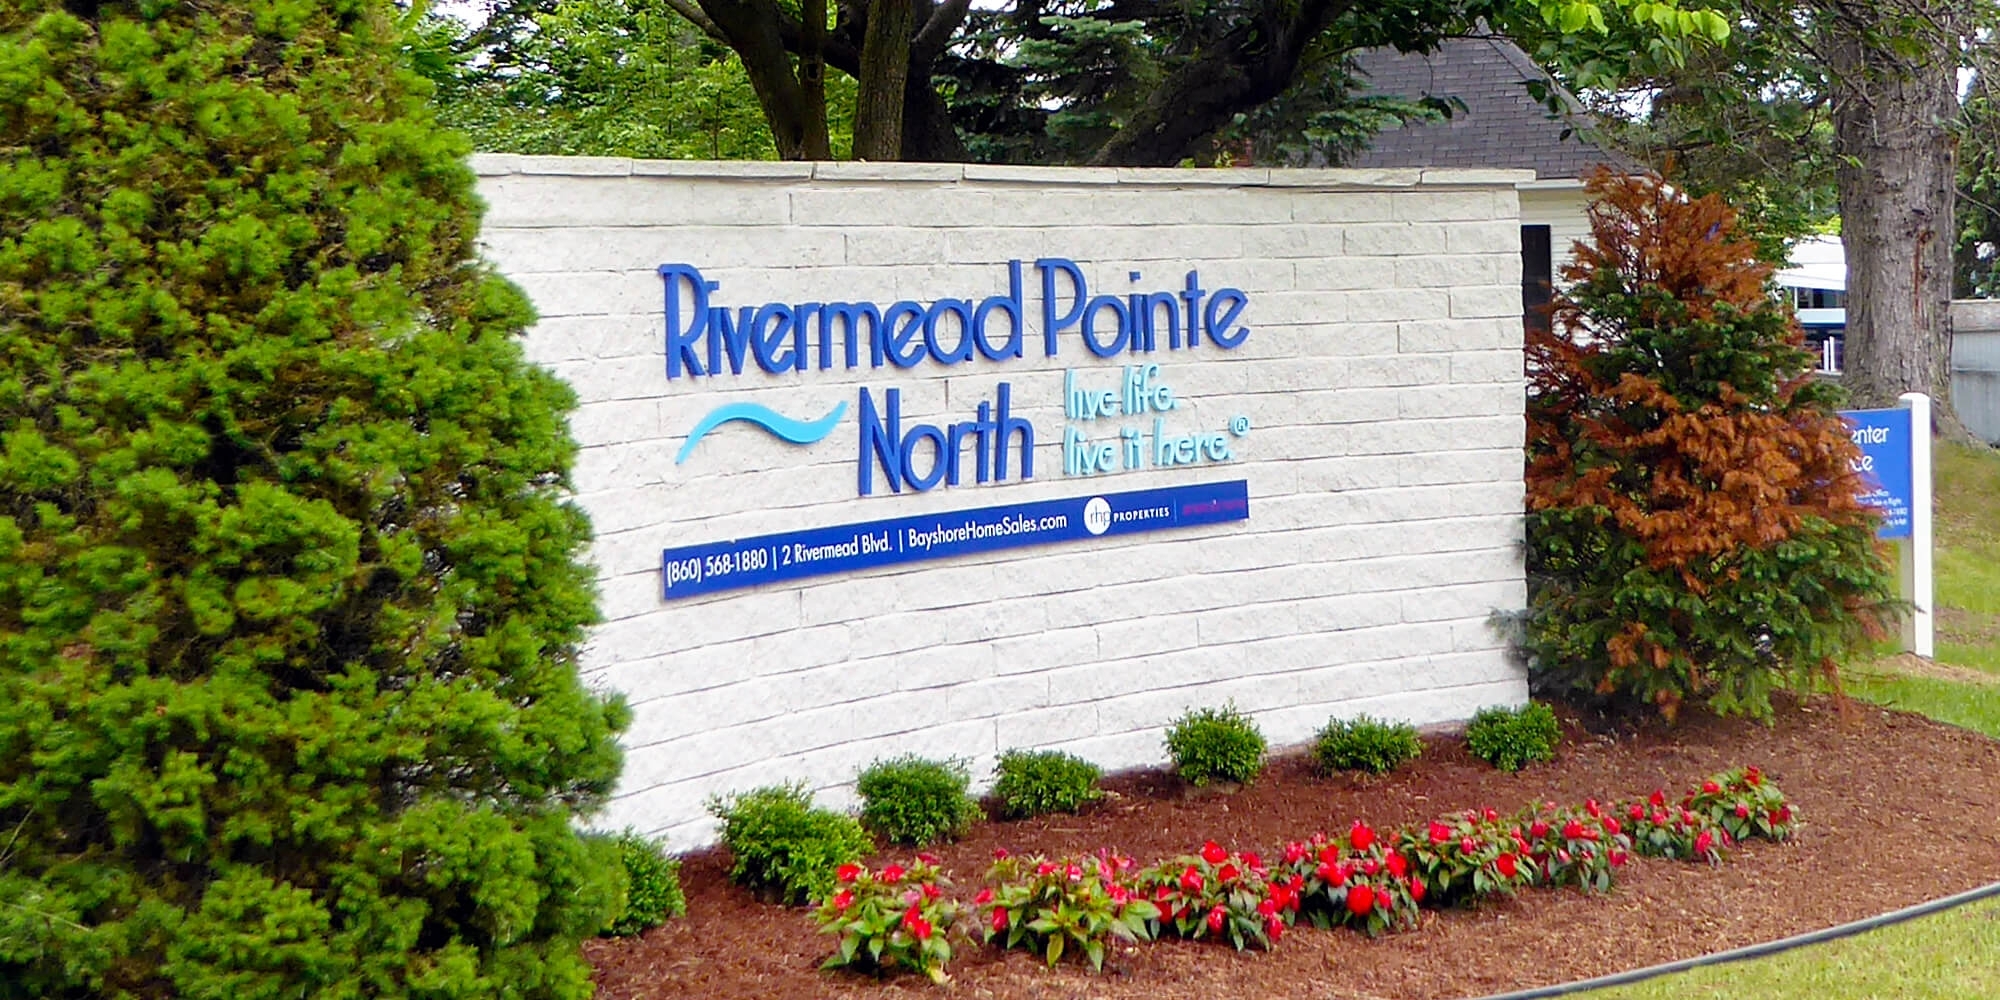 Rivermead Pointe North / South